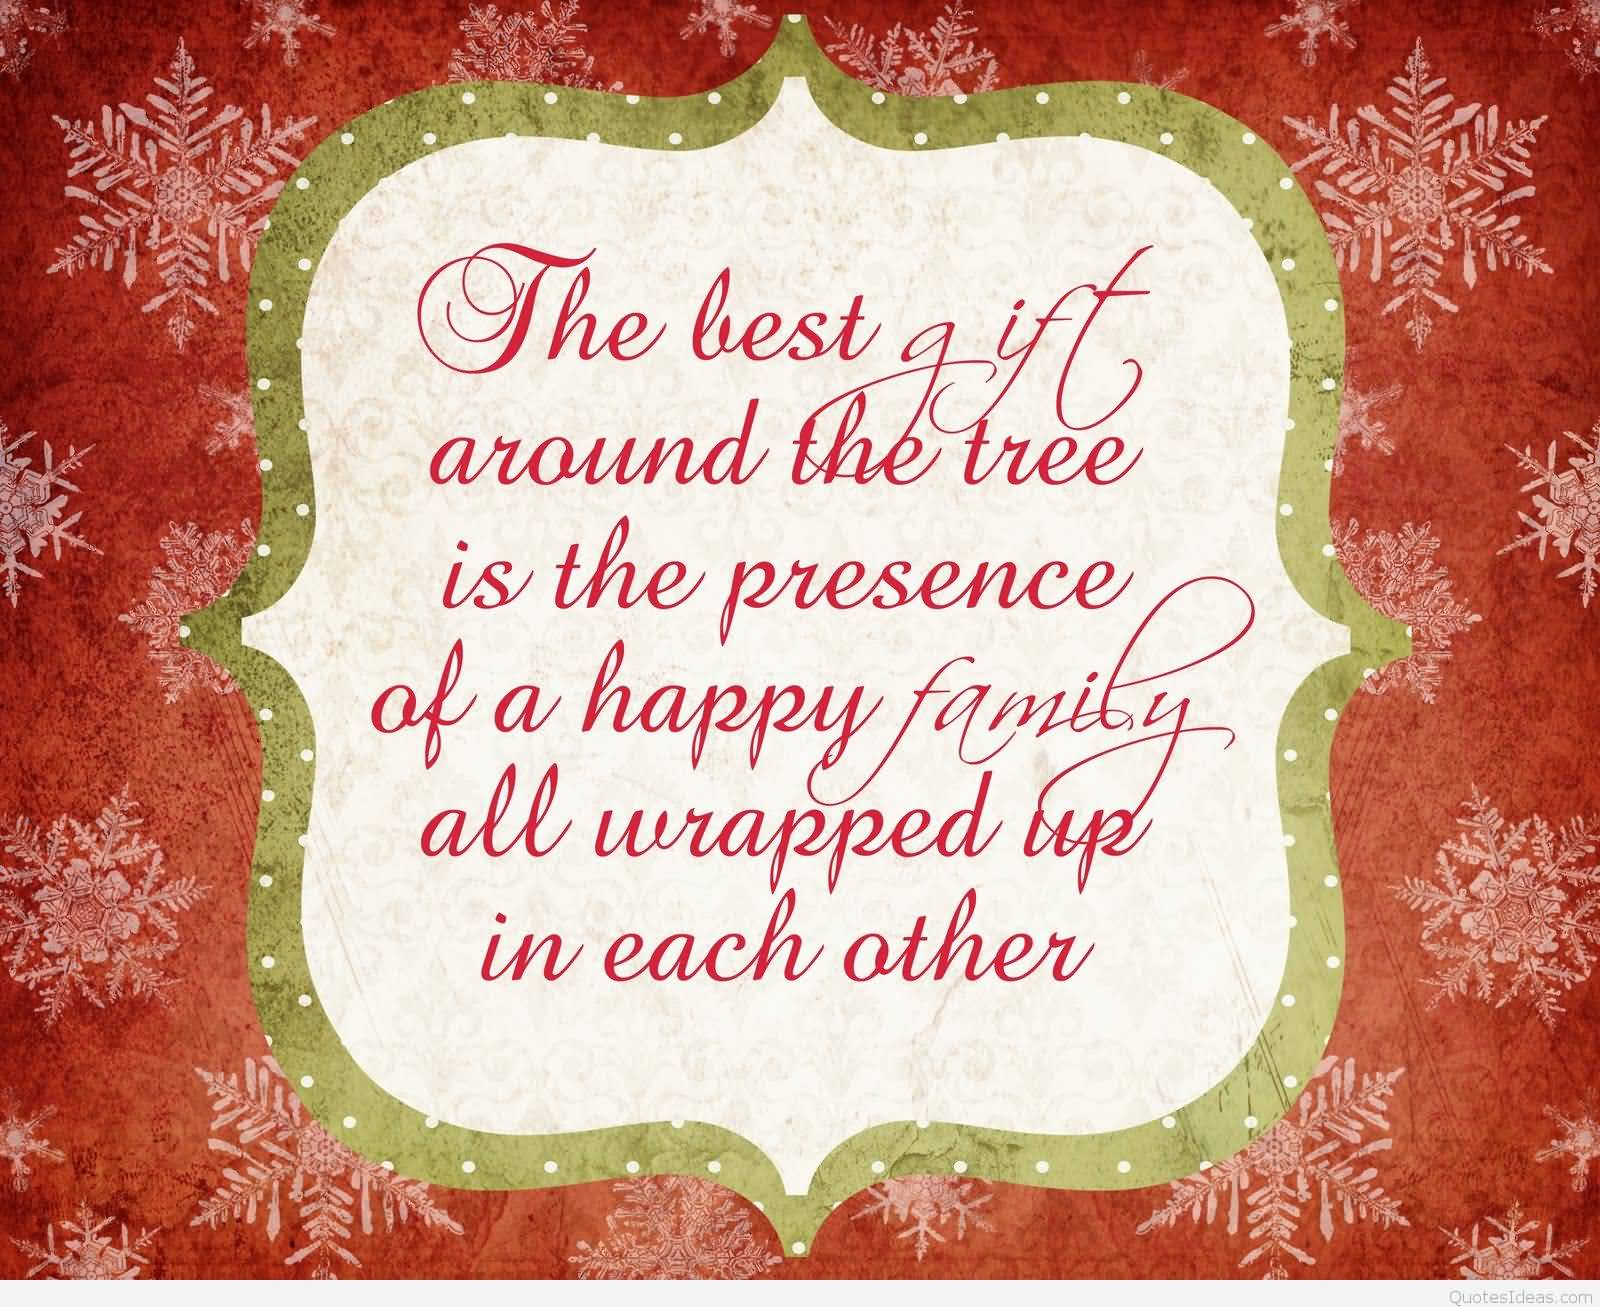 Christmas Quotes For Family Image Picture Photo Wallpaper 19